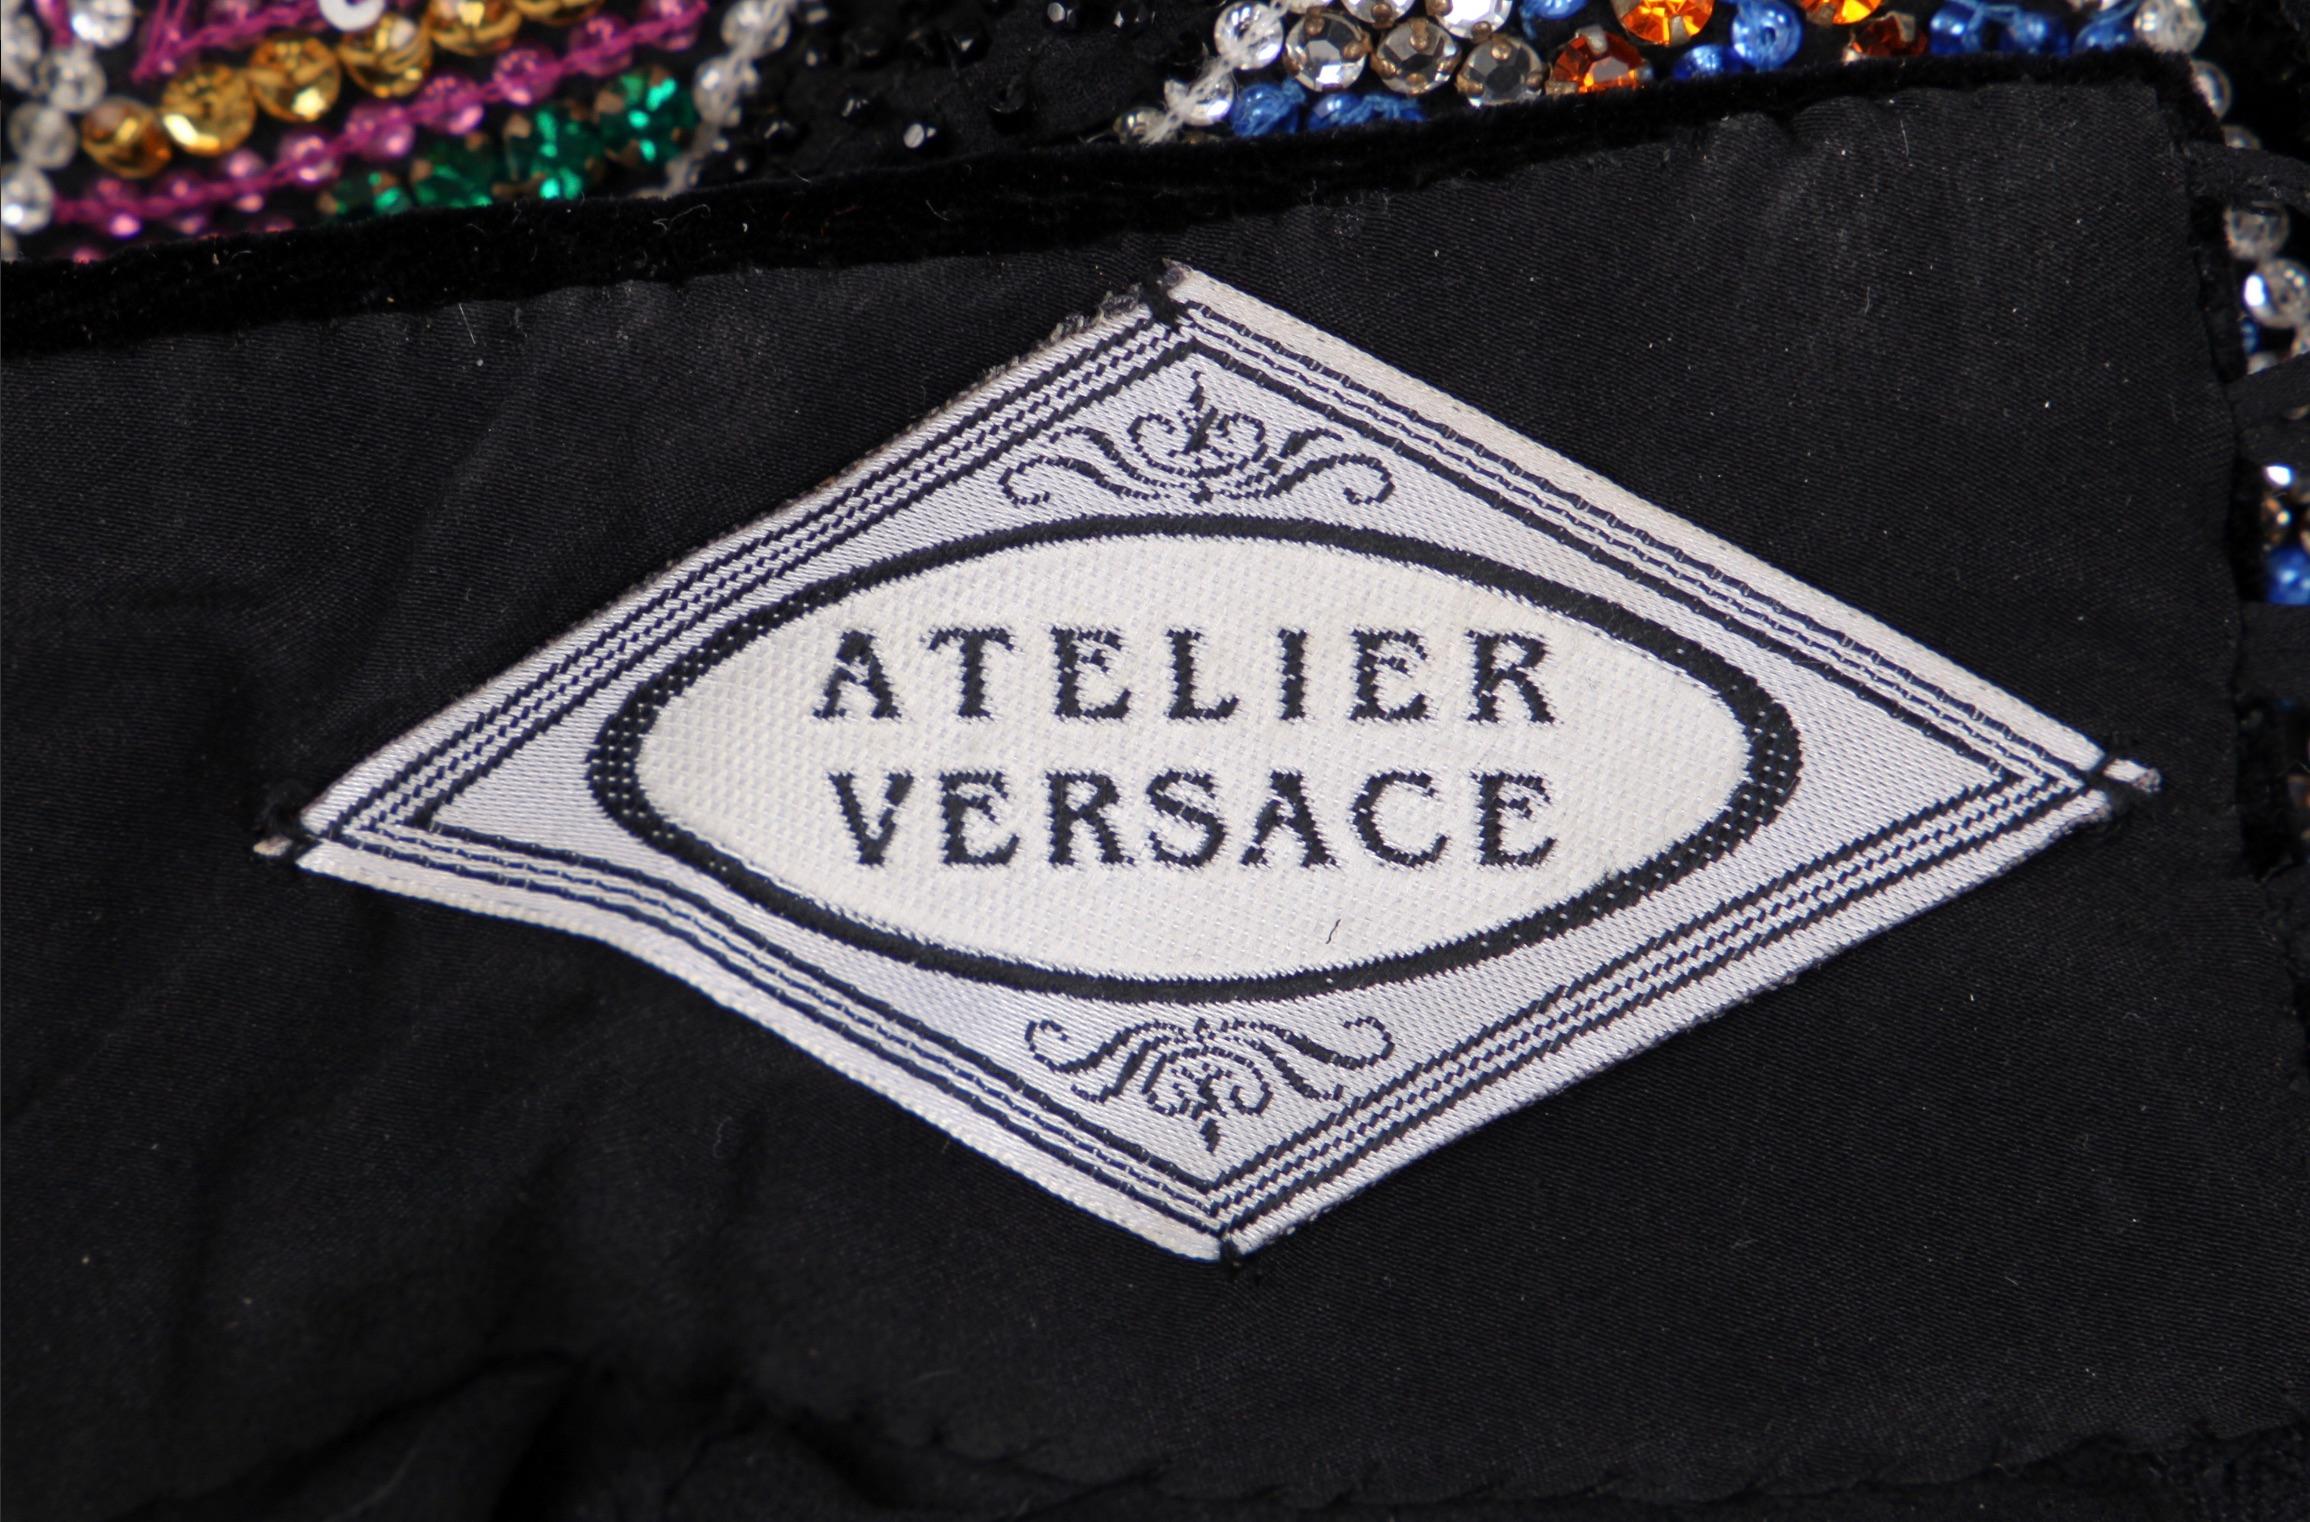 Gianni Versace couture beaded 'Java Forever' dress, Autumn-Winter 1989-90 For Sale 2